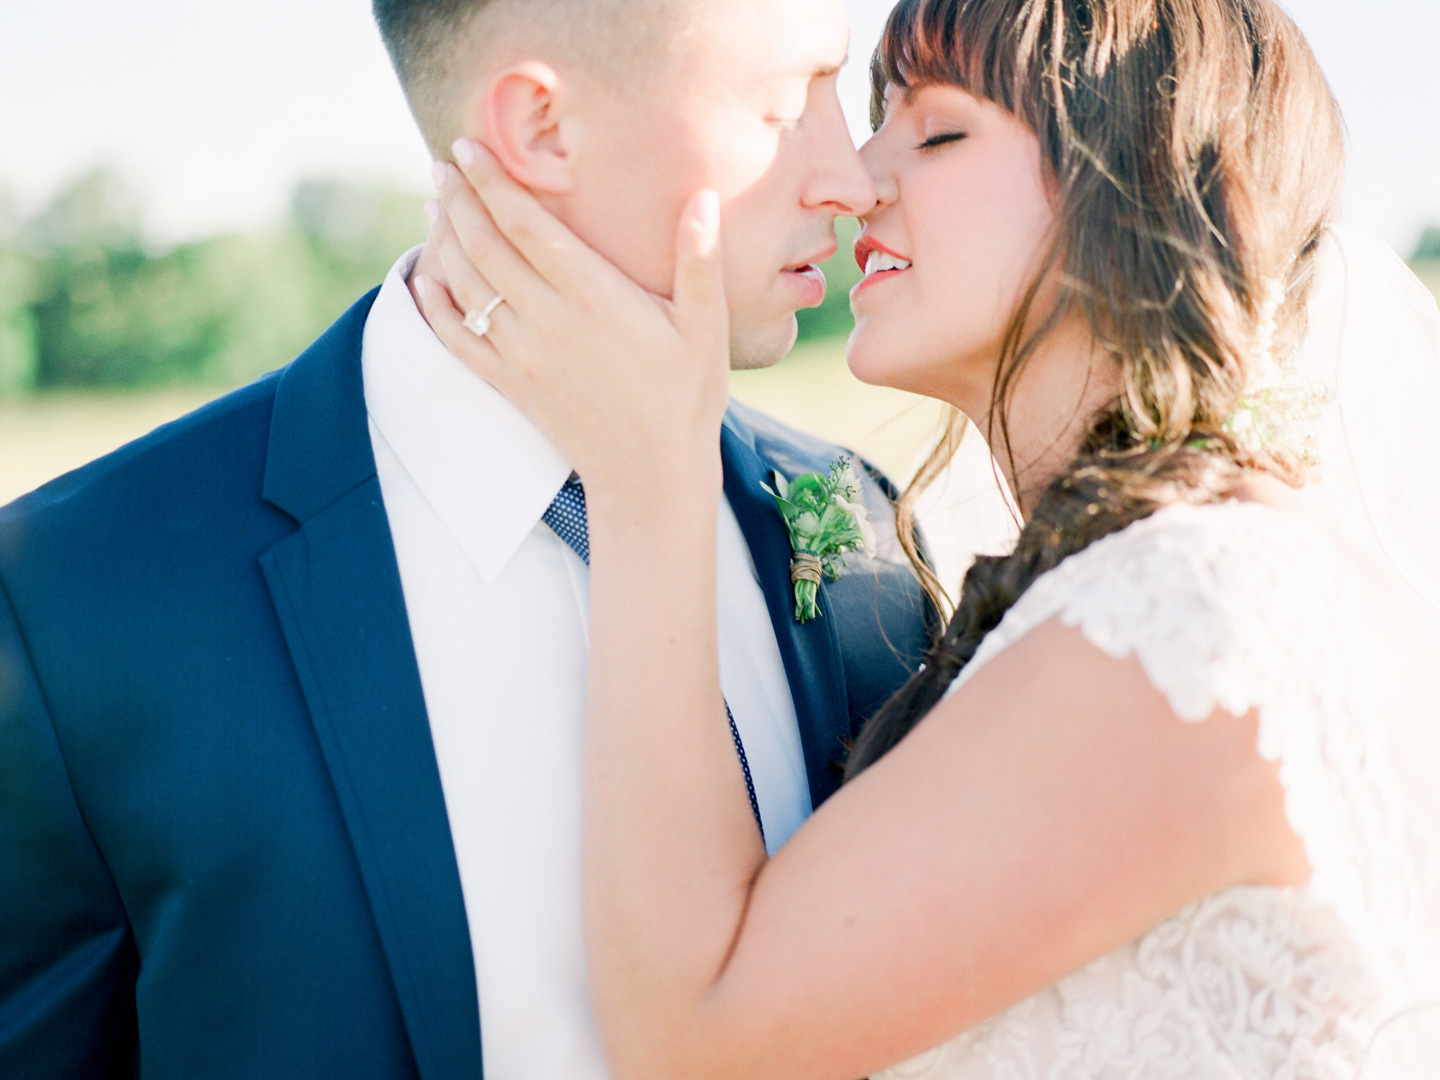 Bride and groom, portraiture, belle mariee bridal boutique, allure bridal, jims formal wear, love tree studios, blue bell farm, sugarberry blooms